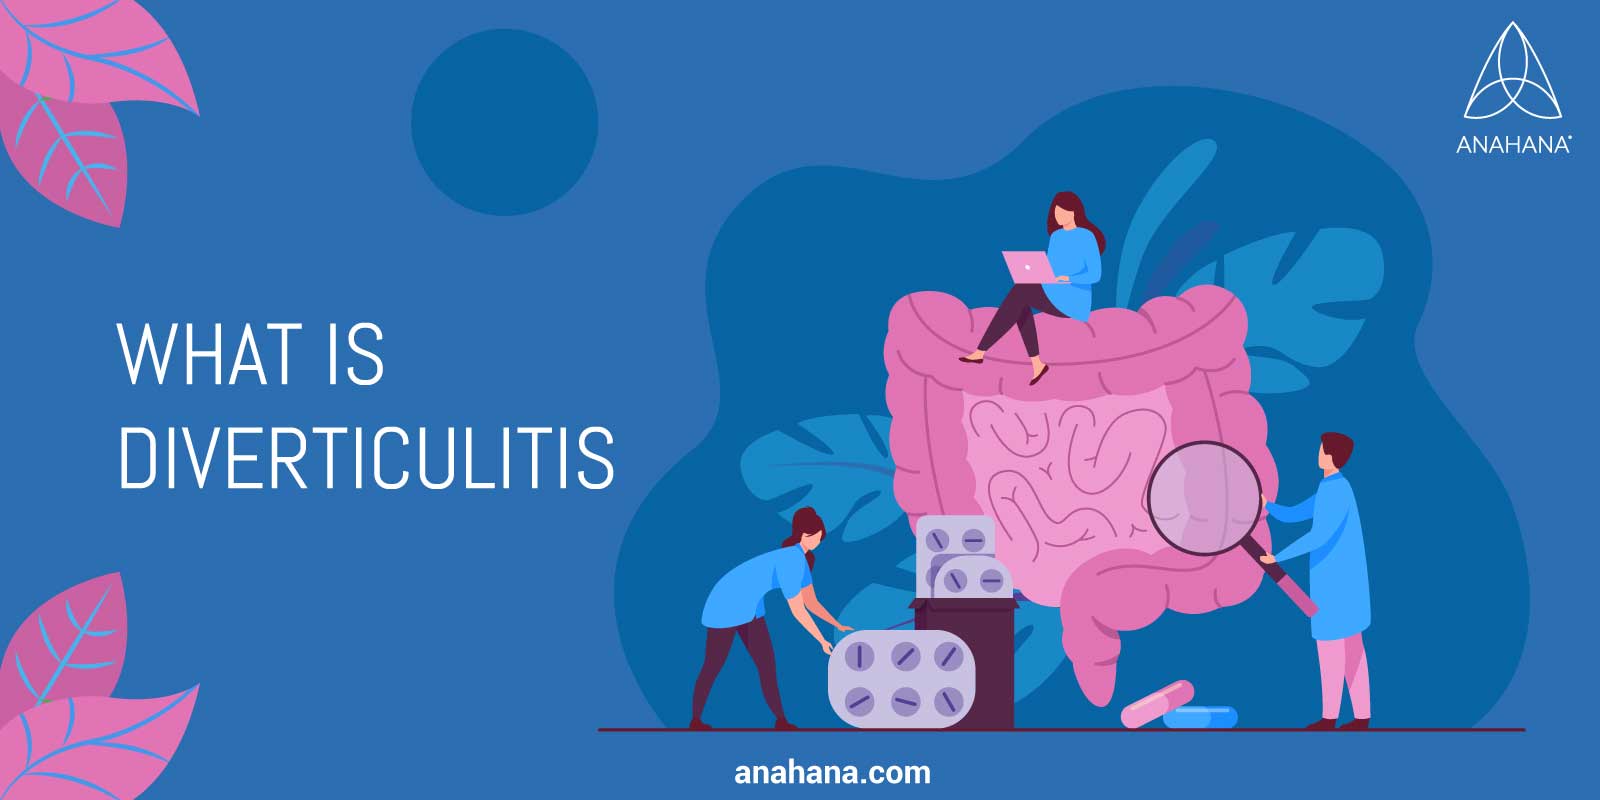 What Is Diverticulitis?